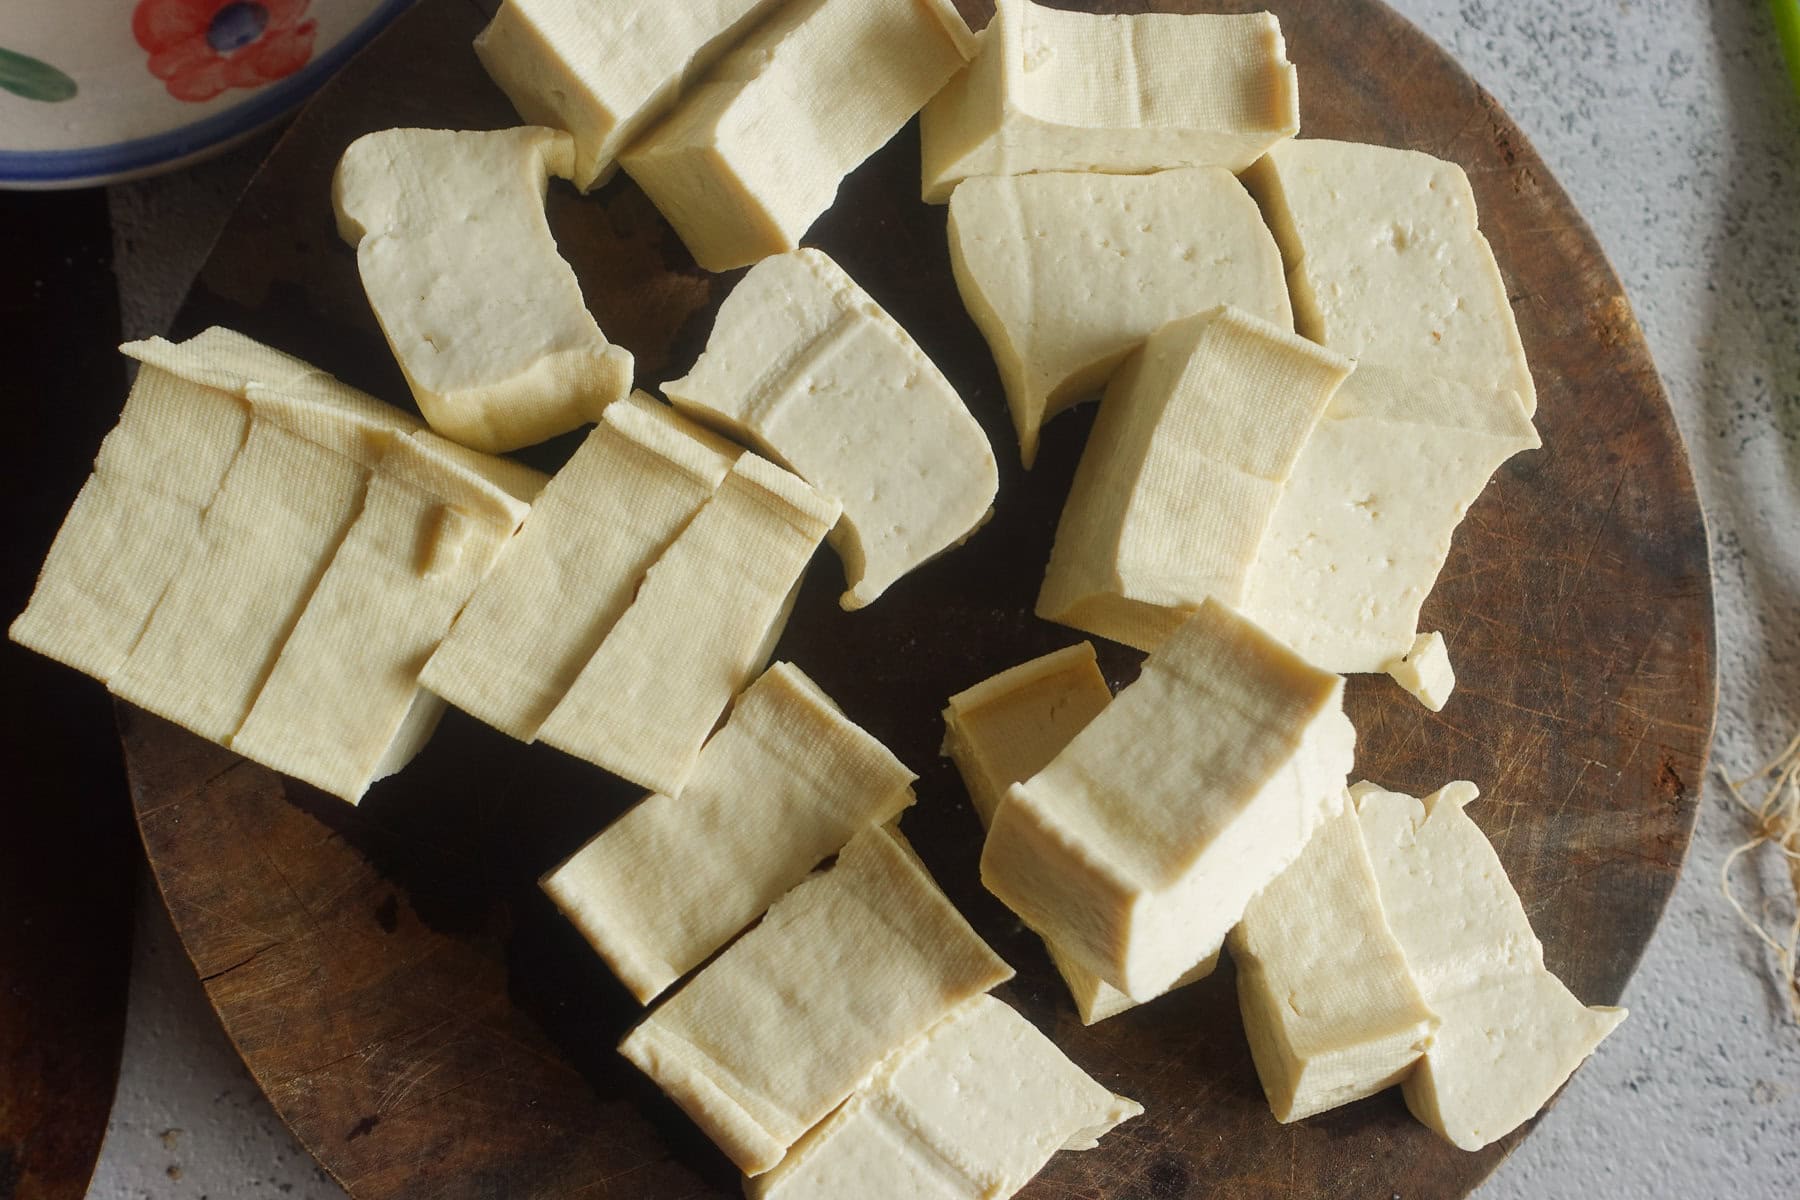 Cut your tofu into cubes